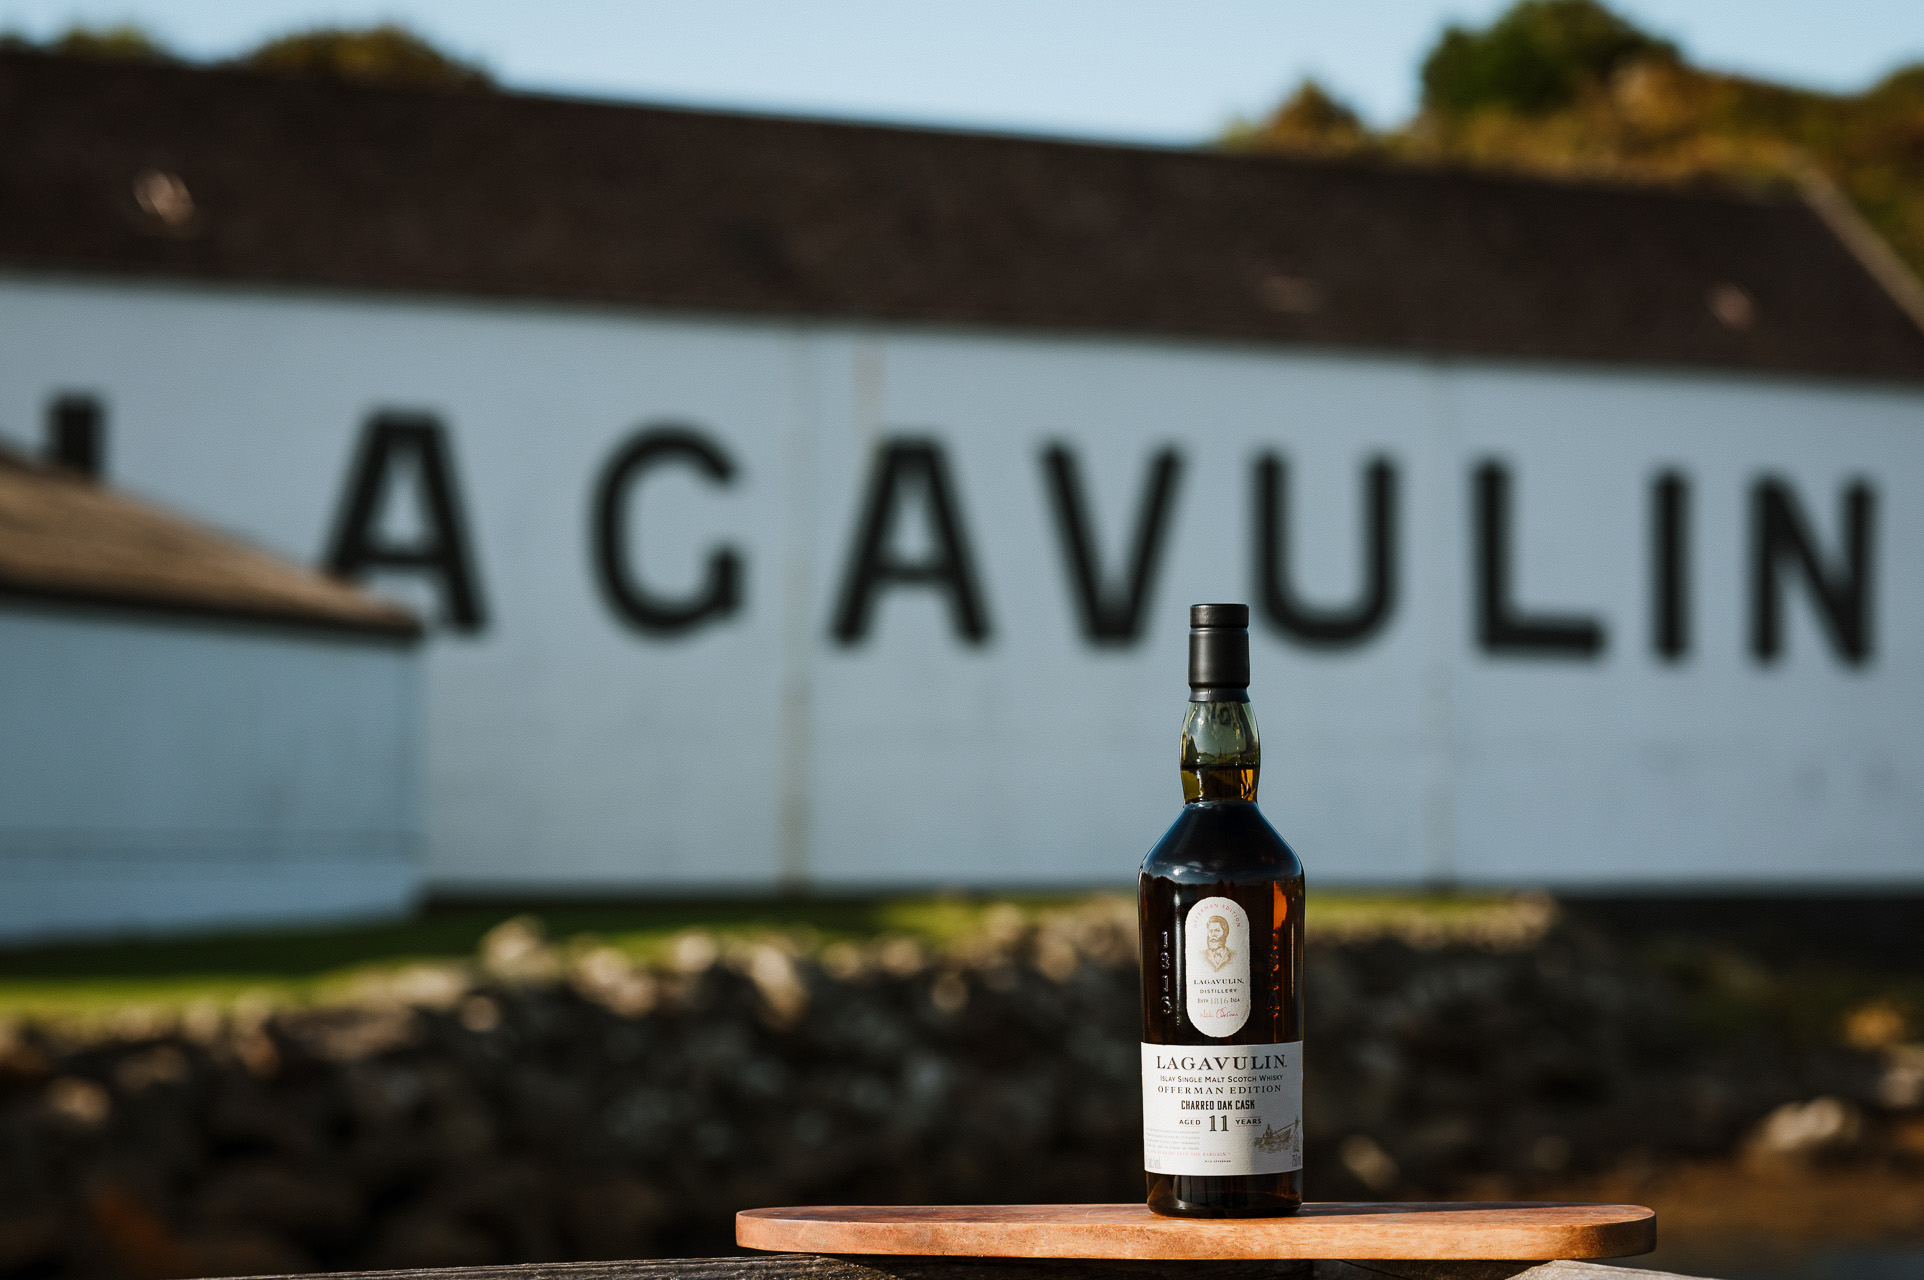 Nick Offerman stars in the latest action-packed spot in the 'Lagavulin: My Tales of Whisky' series in celebration of the launch of Lagavulin Offerman Edition: Charred Oak Cask, marking the duo's third collaboration.